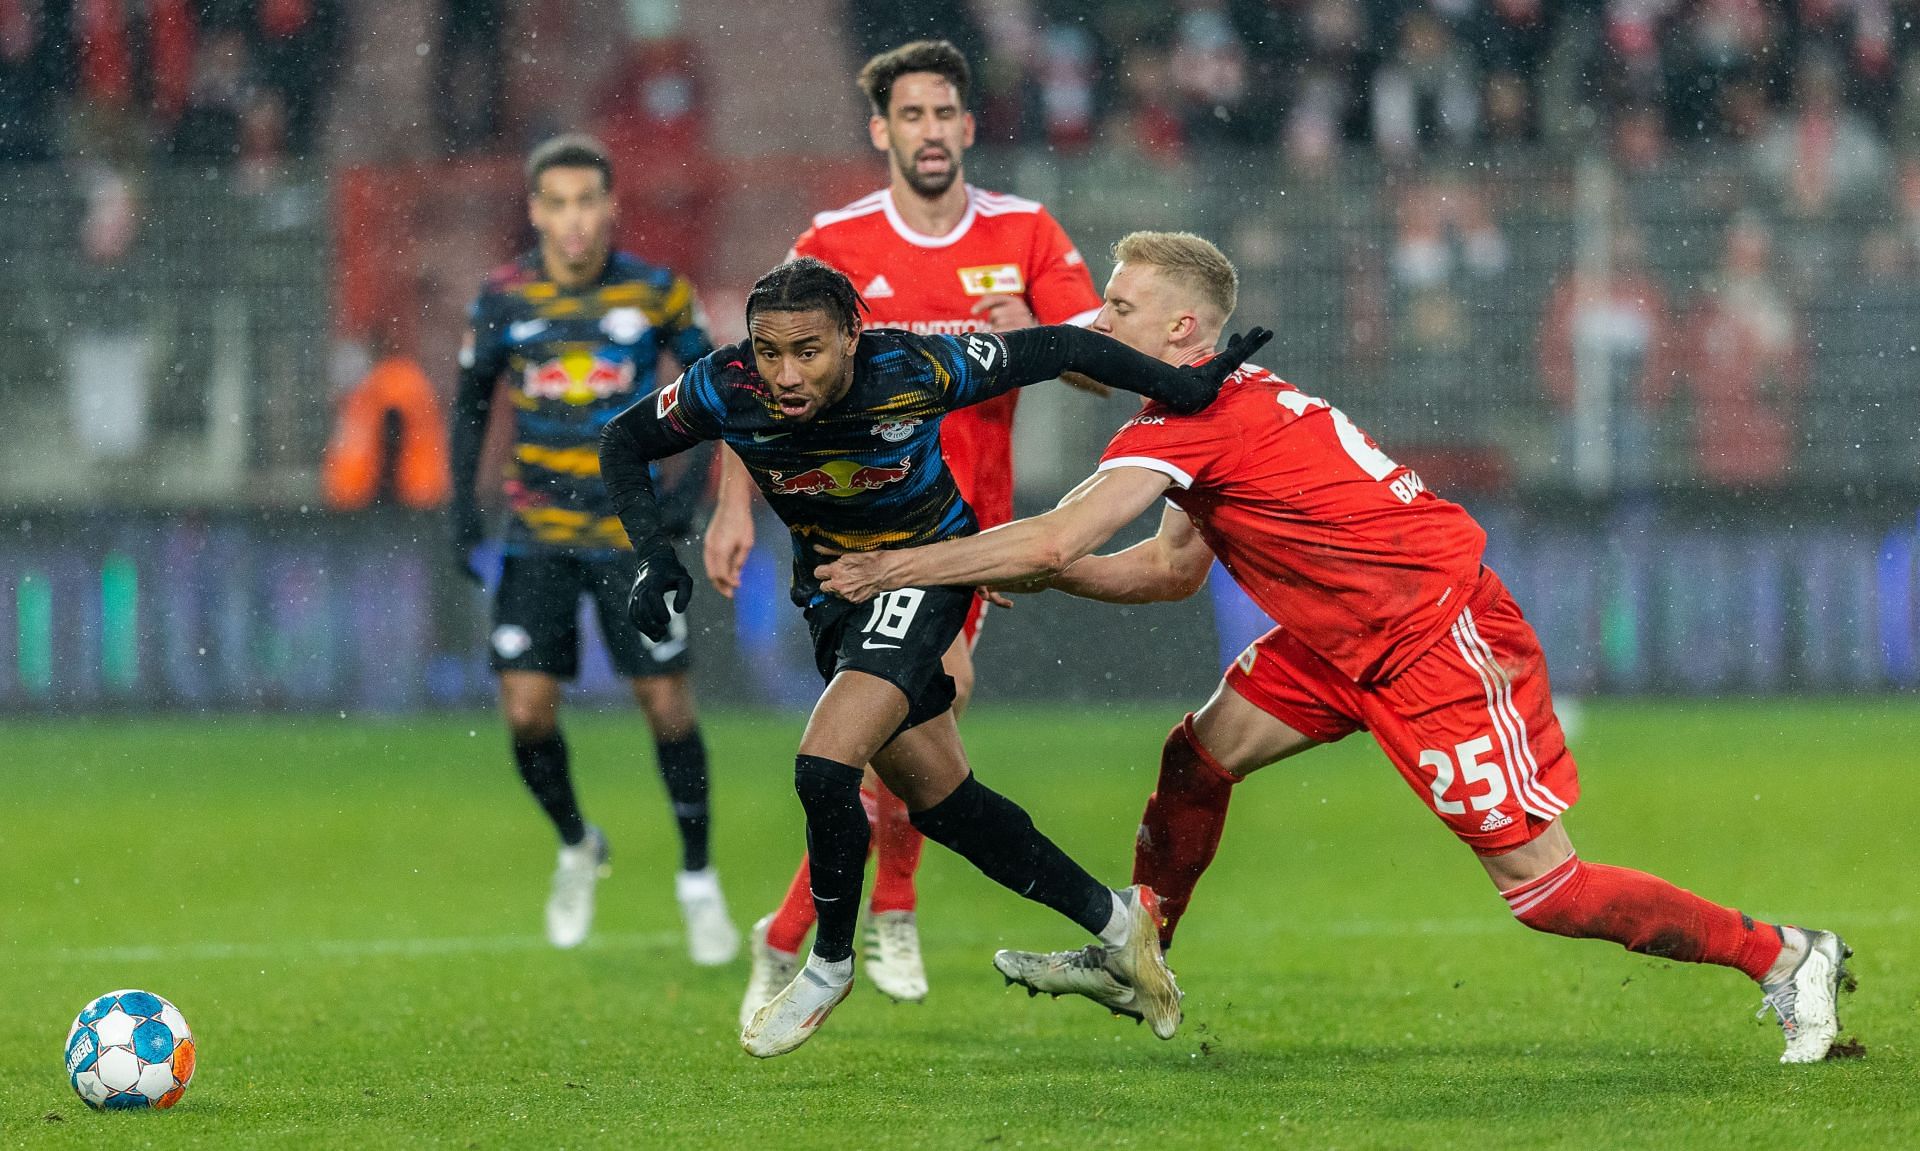 RB Leipzig and Union Berlin square off in the DFB-Pokal semi-final on Wednesday